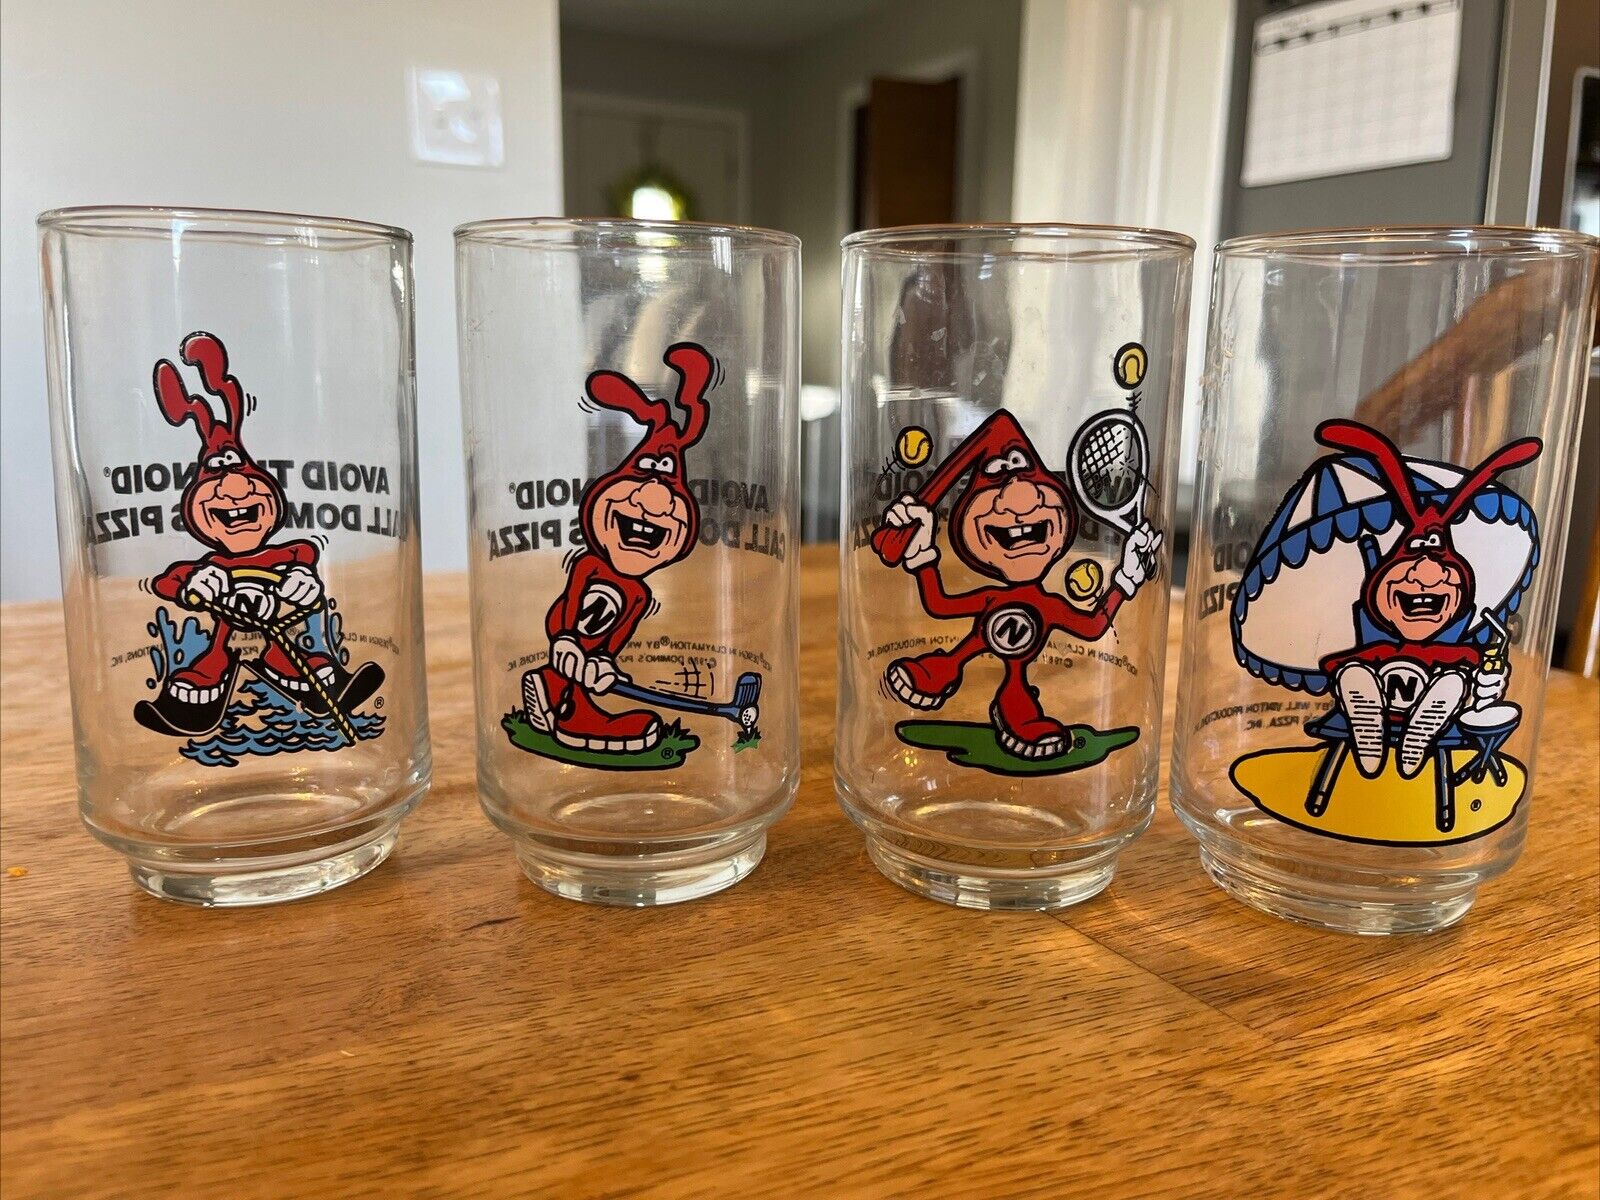 Vintage Domino's Pizza Avoid the Noid 1987/88 Drinking Glasses Display Items